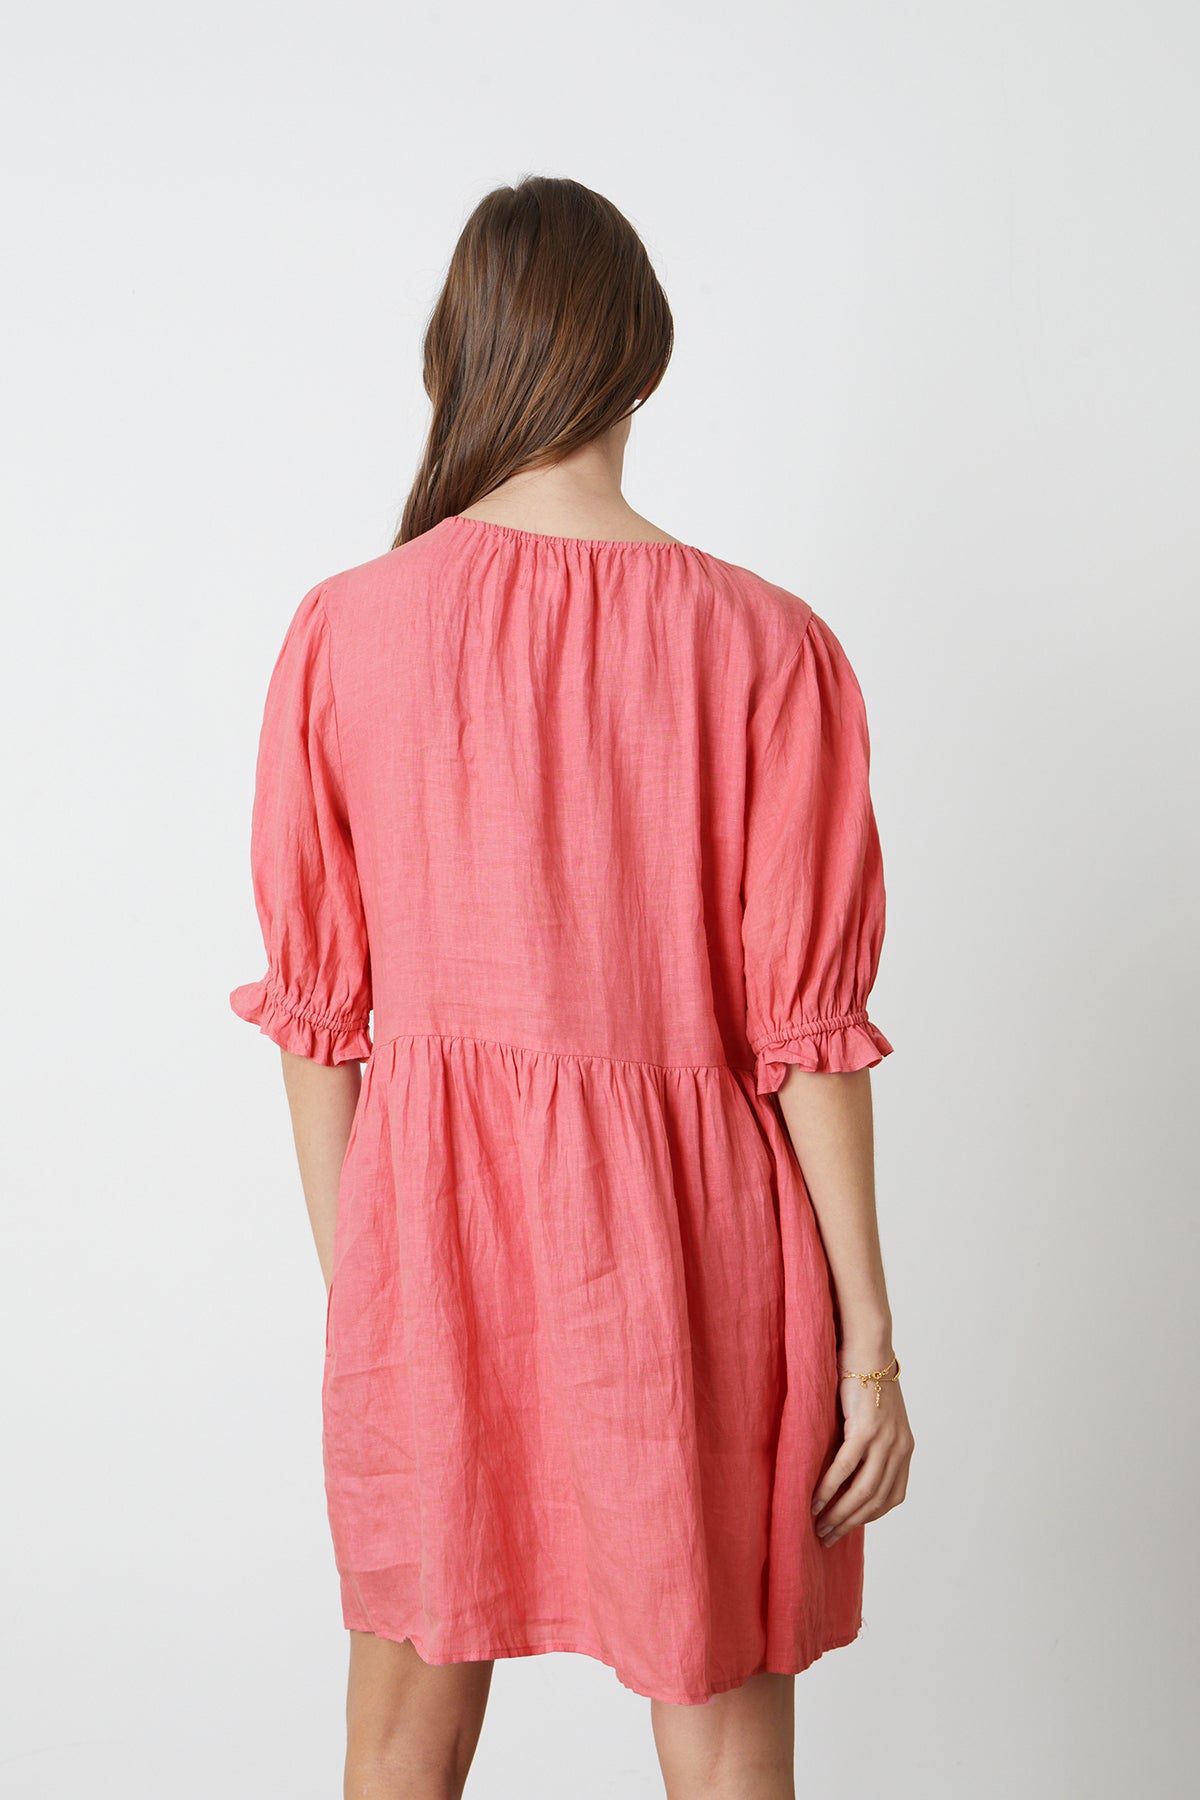 The back view of a woman wearing a Velvet by Graham & Spencer KAILANI LINEN PUFF SLEEVE DRESS.-26342704349377